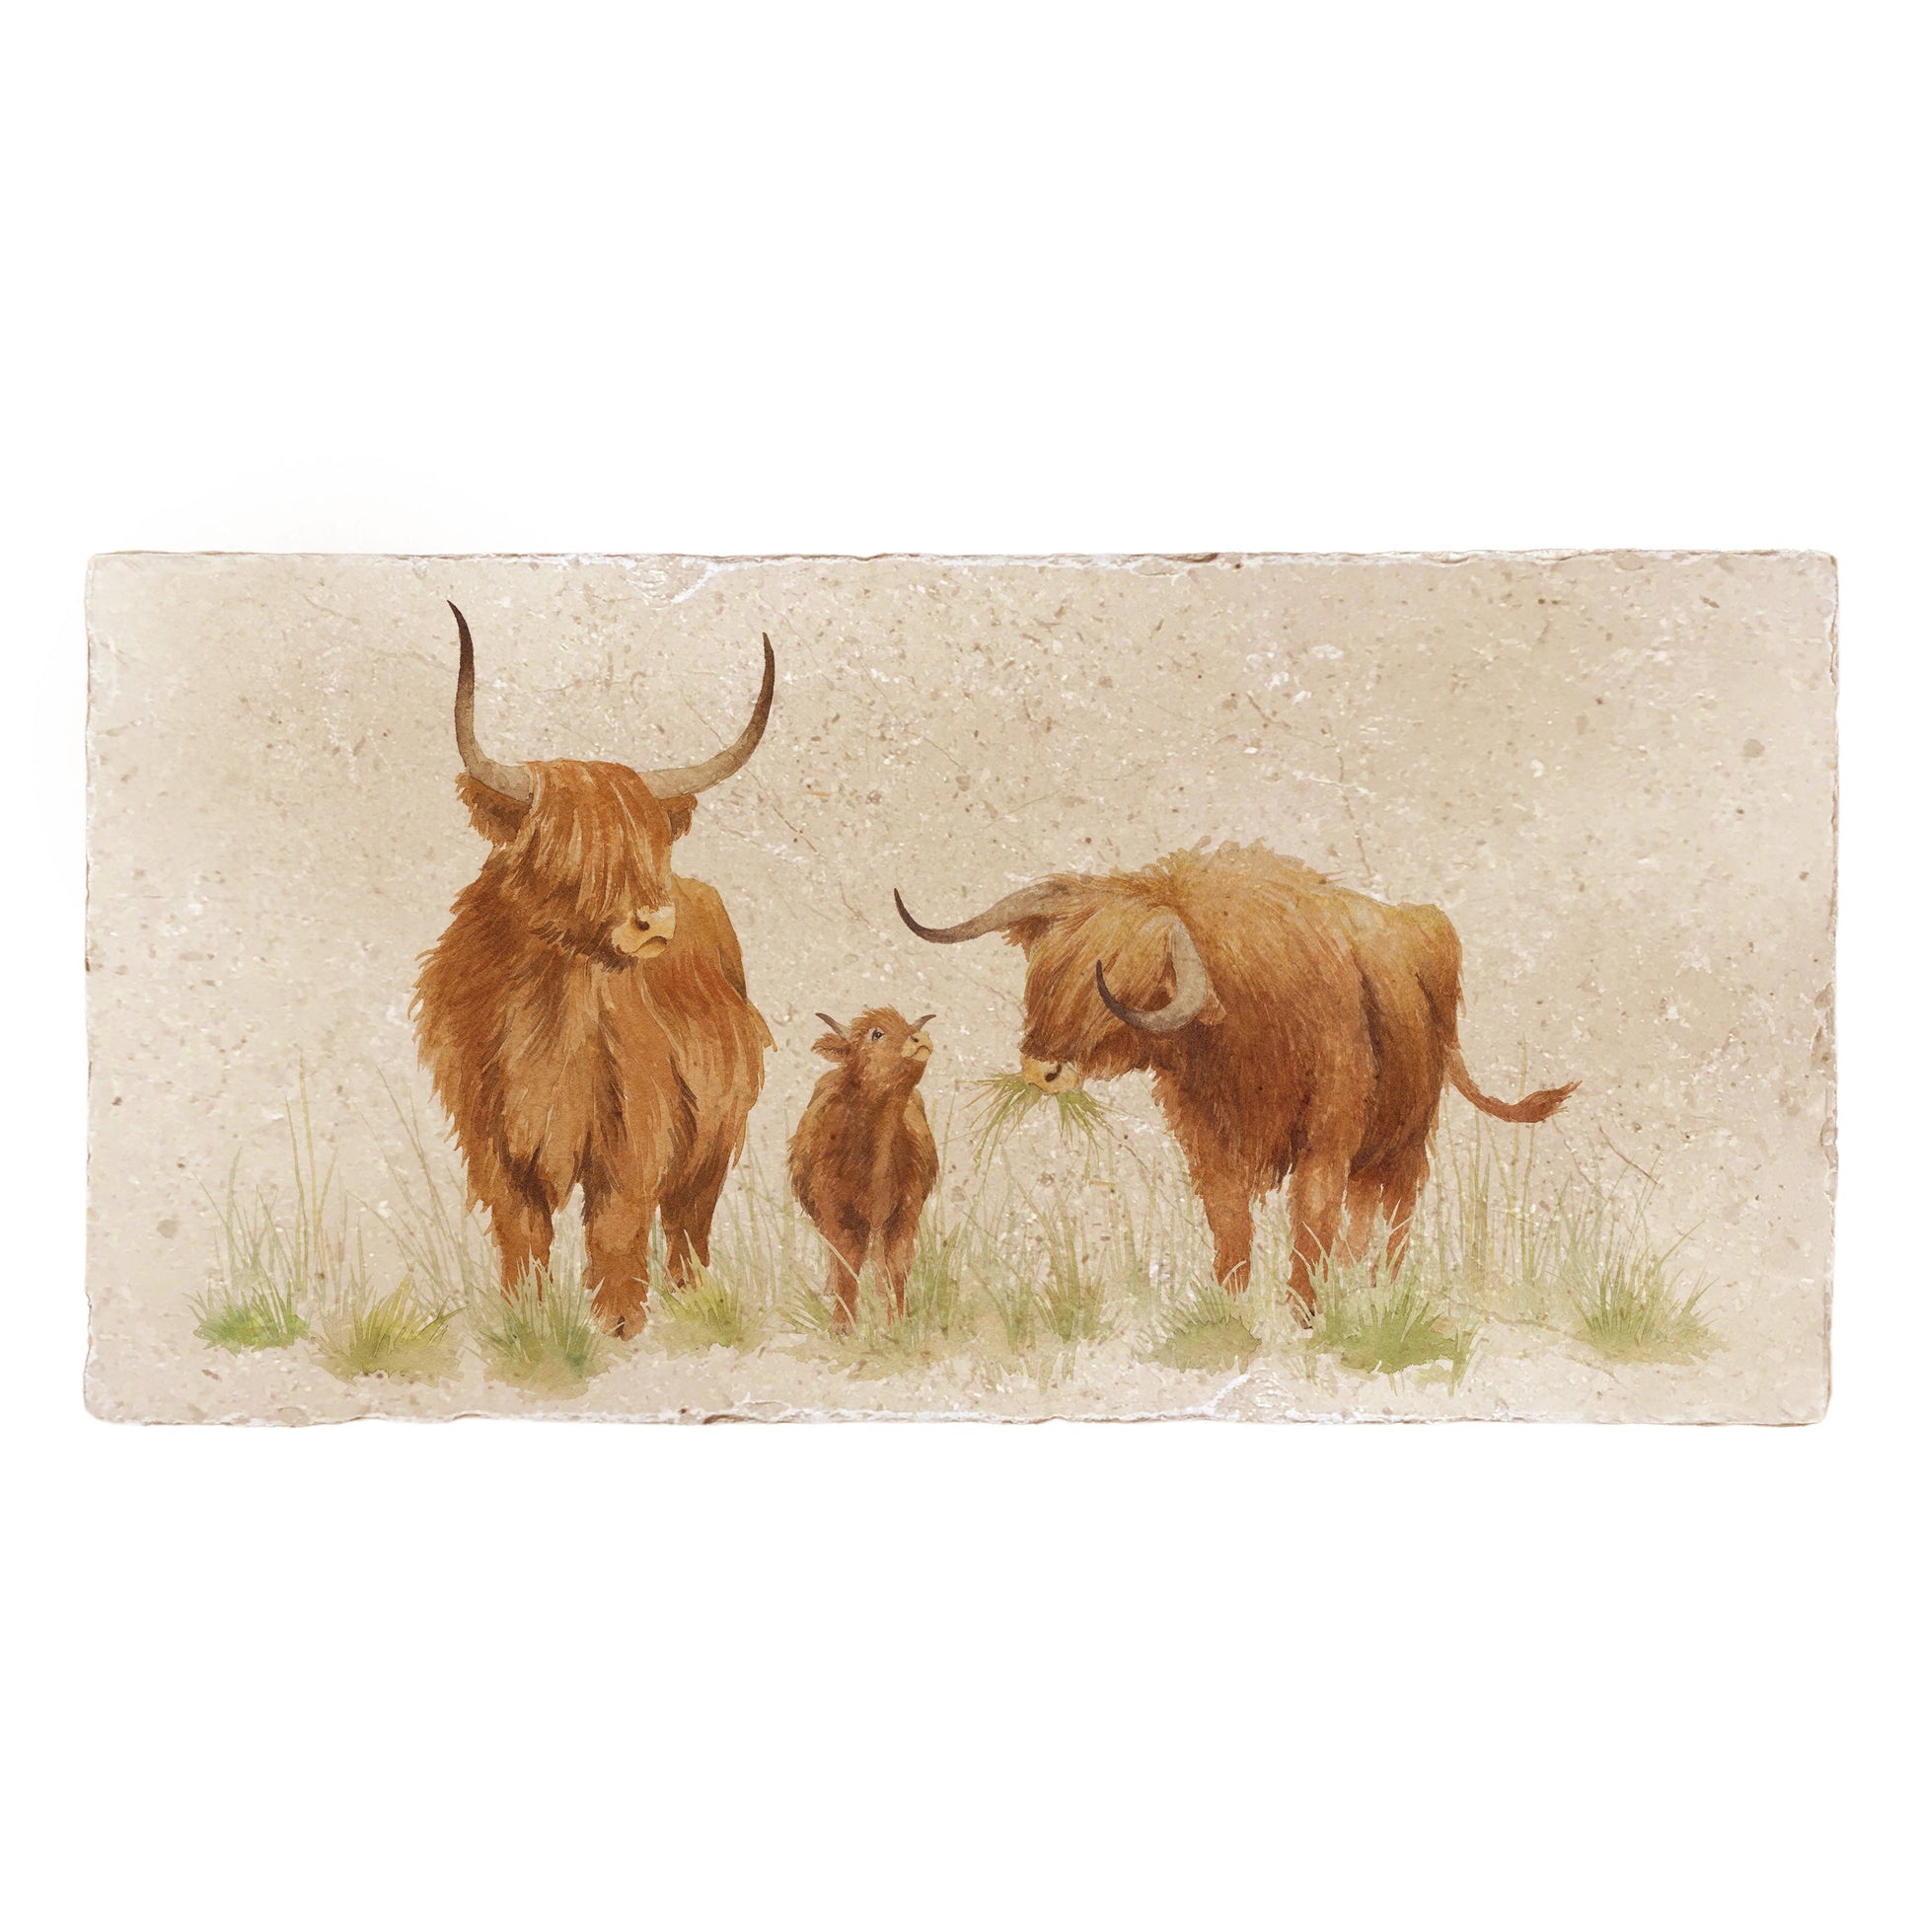 A rectangular cream marble sharing platter, featuring a watercolour design of a family of three highland cows, including a bull, cow and calf.